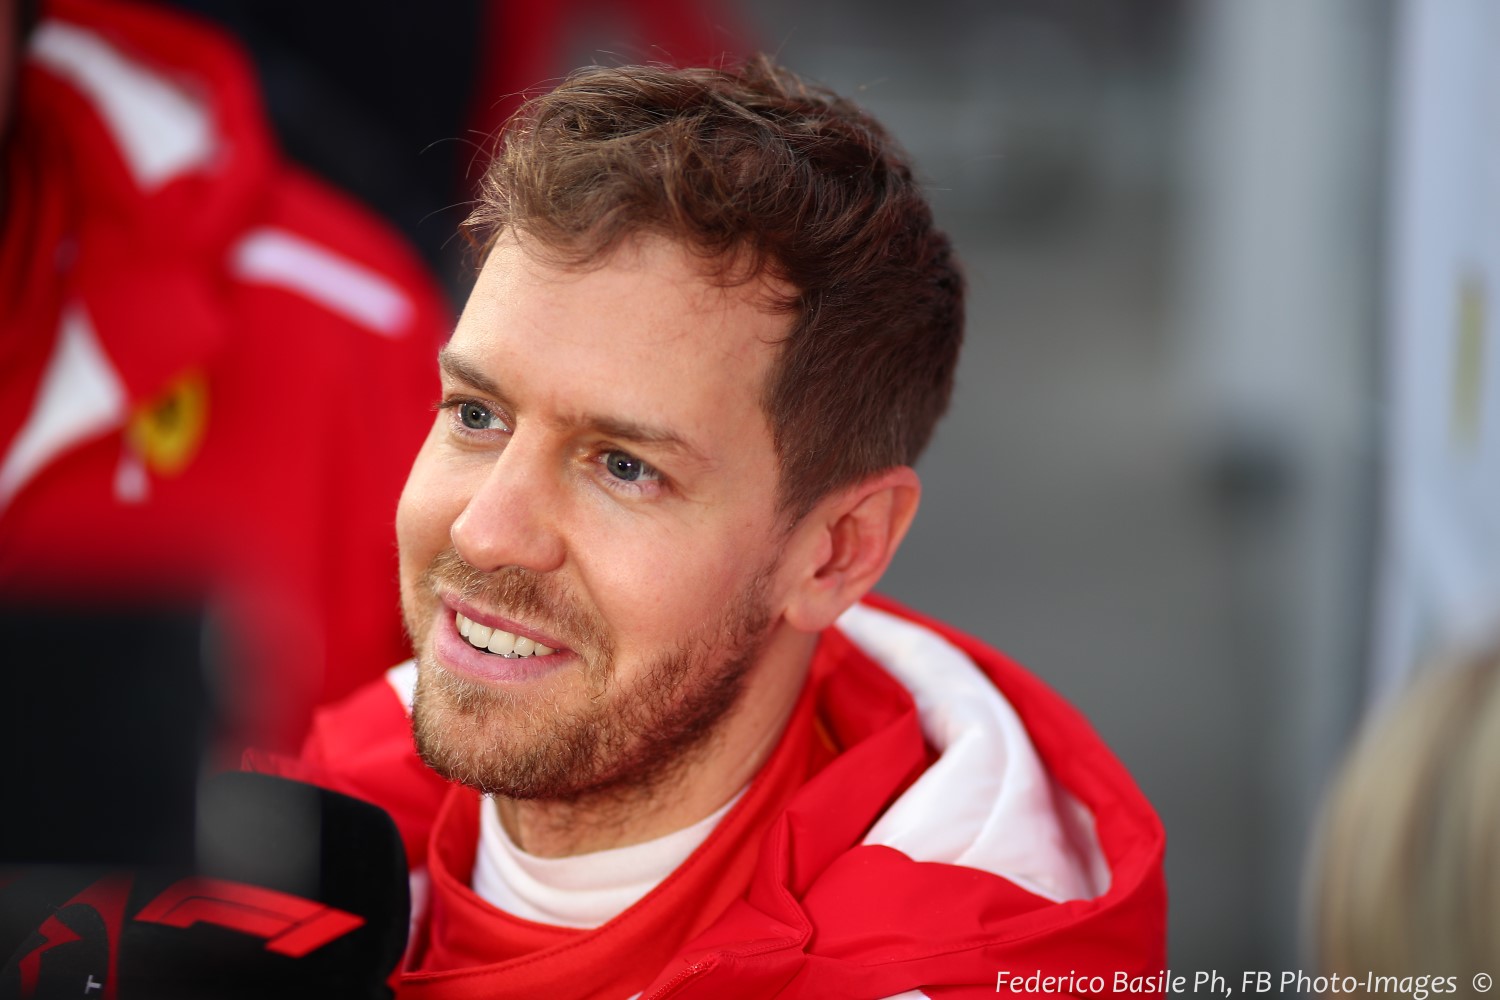 Did rumored troubles at home undo Vettel in 2018